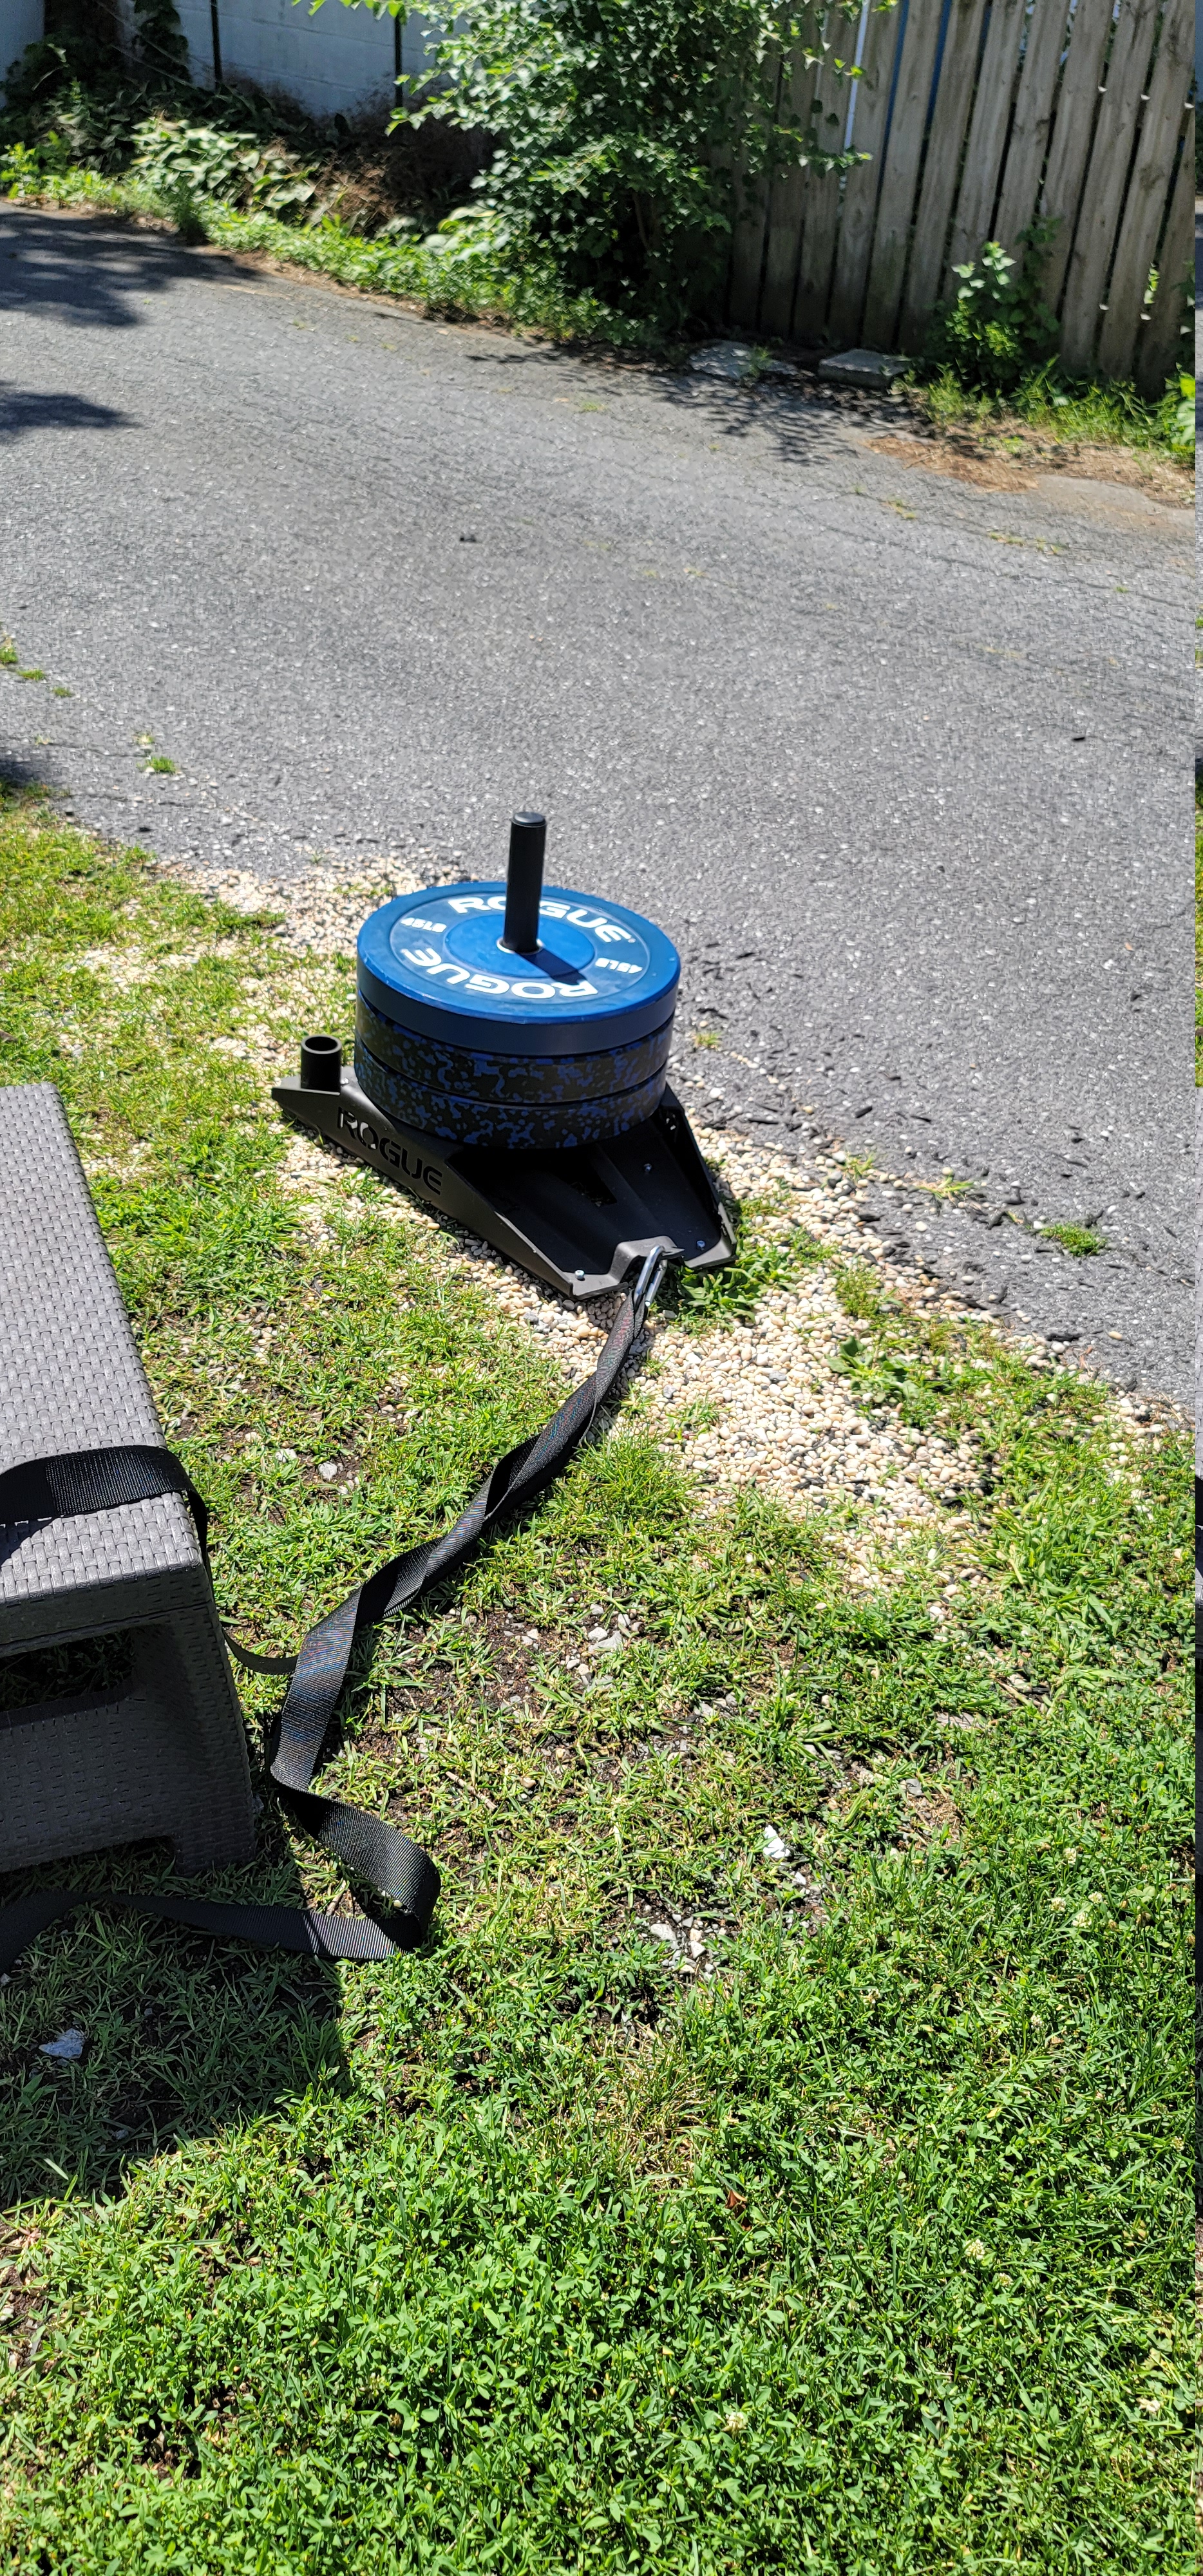 This is a picture of our black Rogue Slice Sled in the grass at the edge of a road. It has three blue 45 pound bumper plates on it.